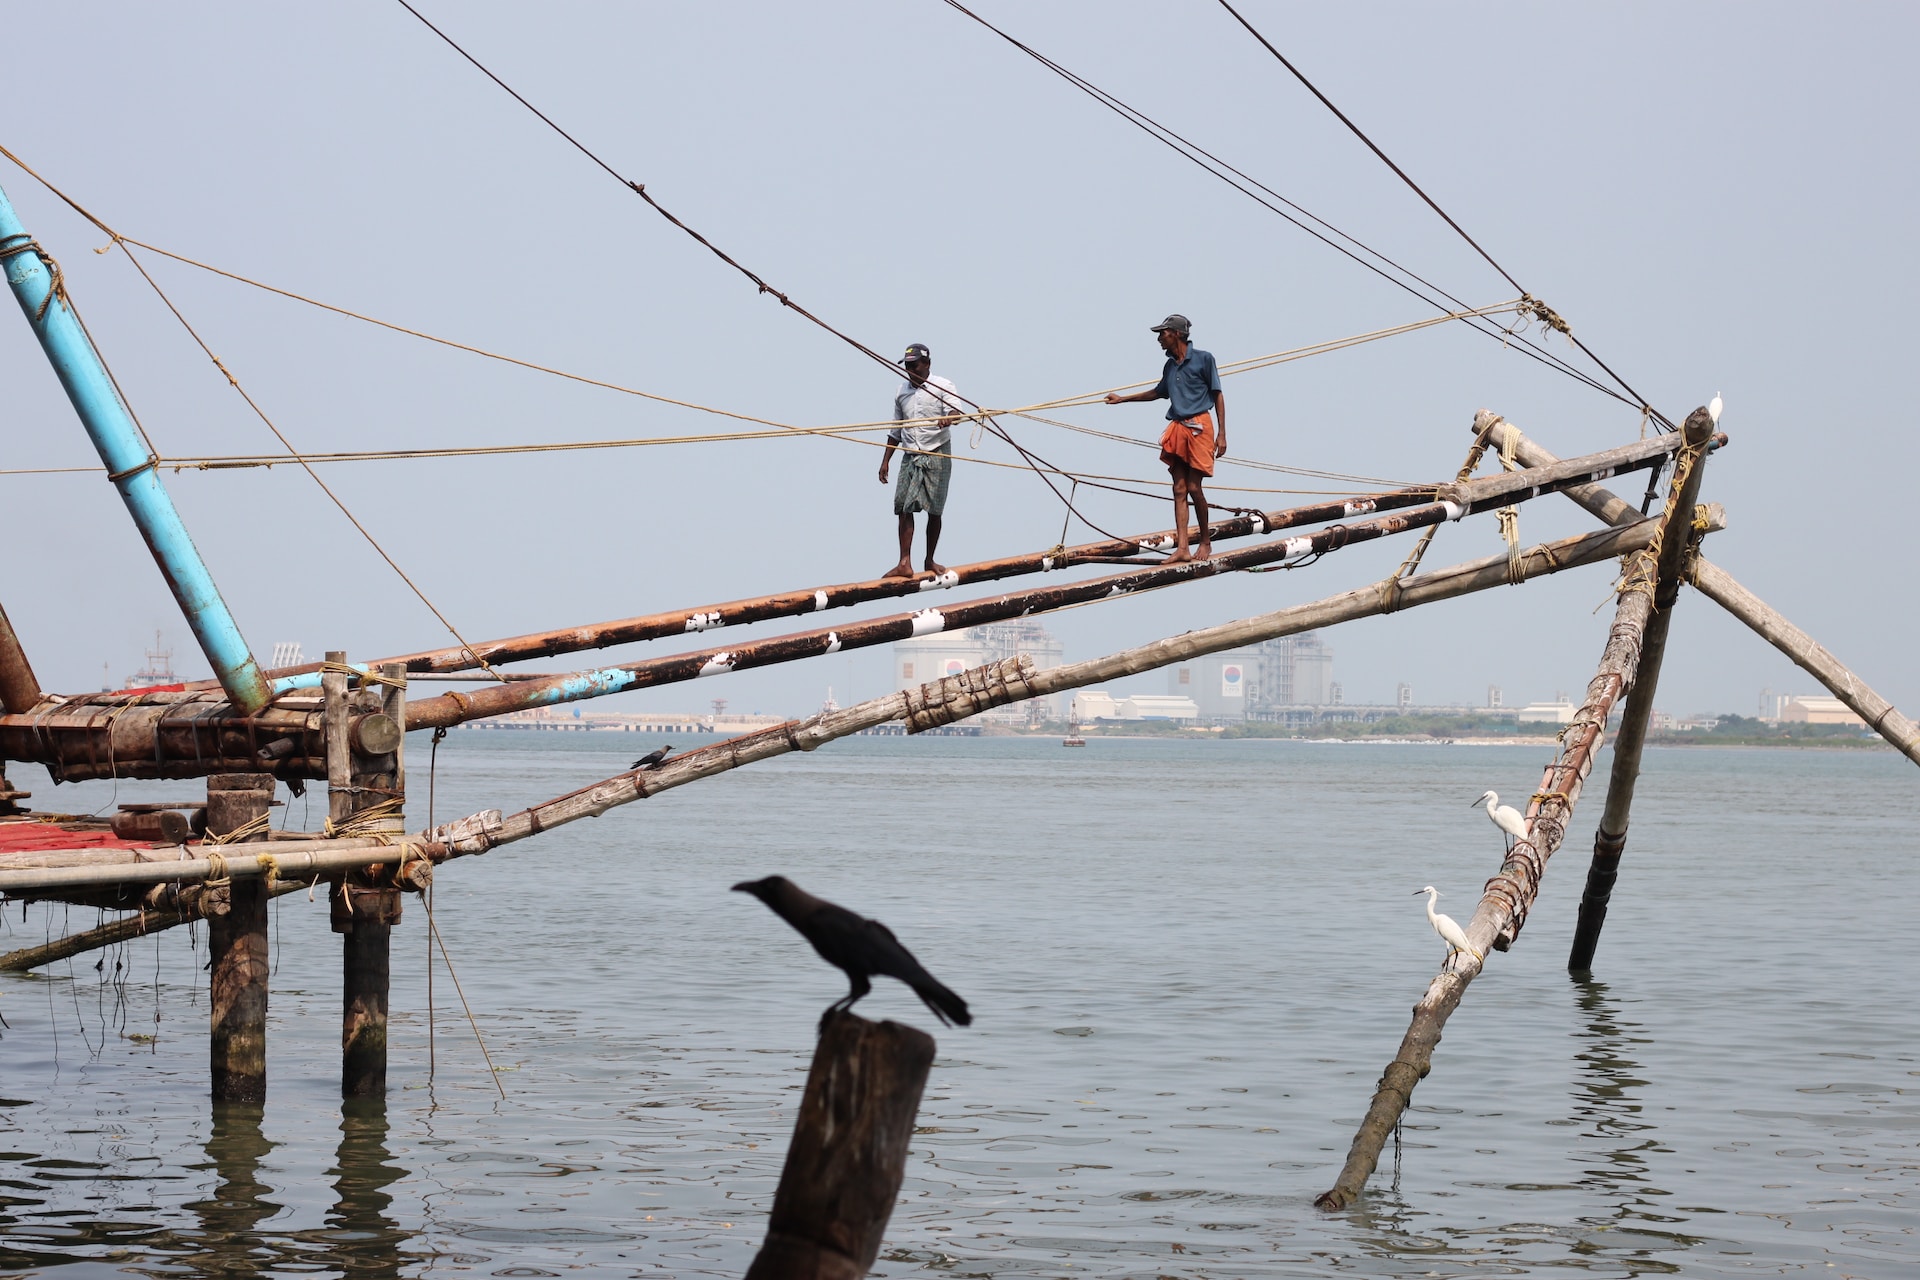 Beyond Catch: Reimagining India’s Fisheries for Sustainable Growth